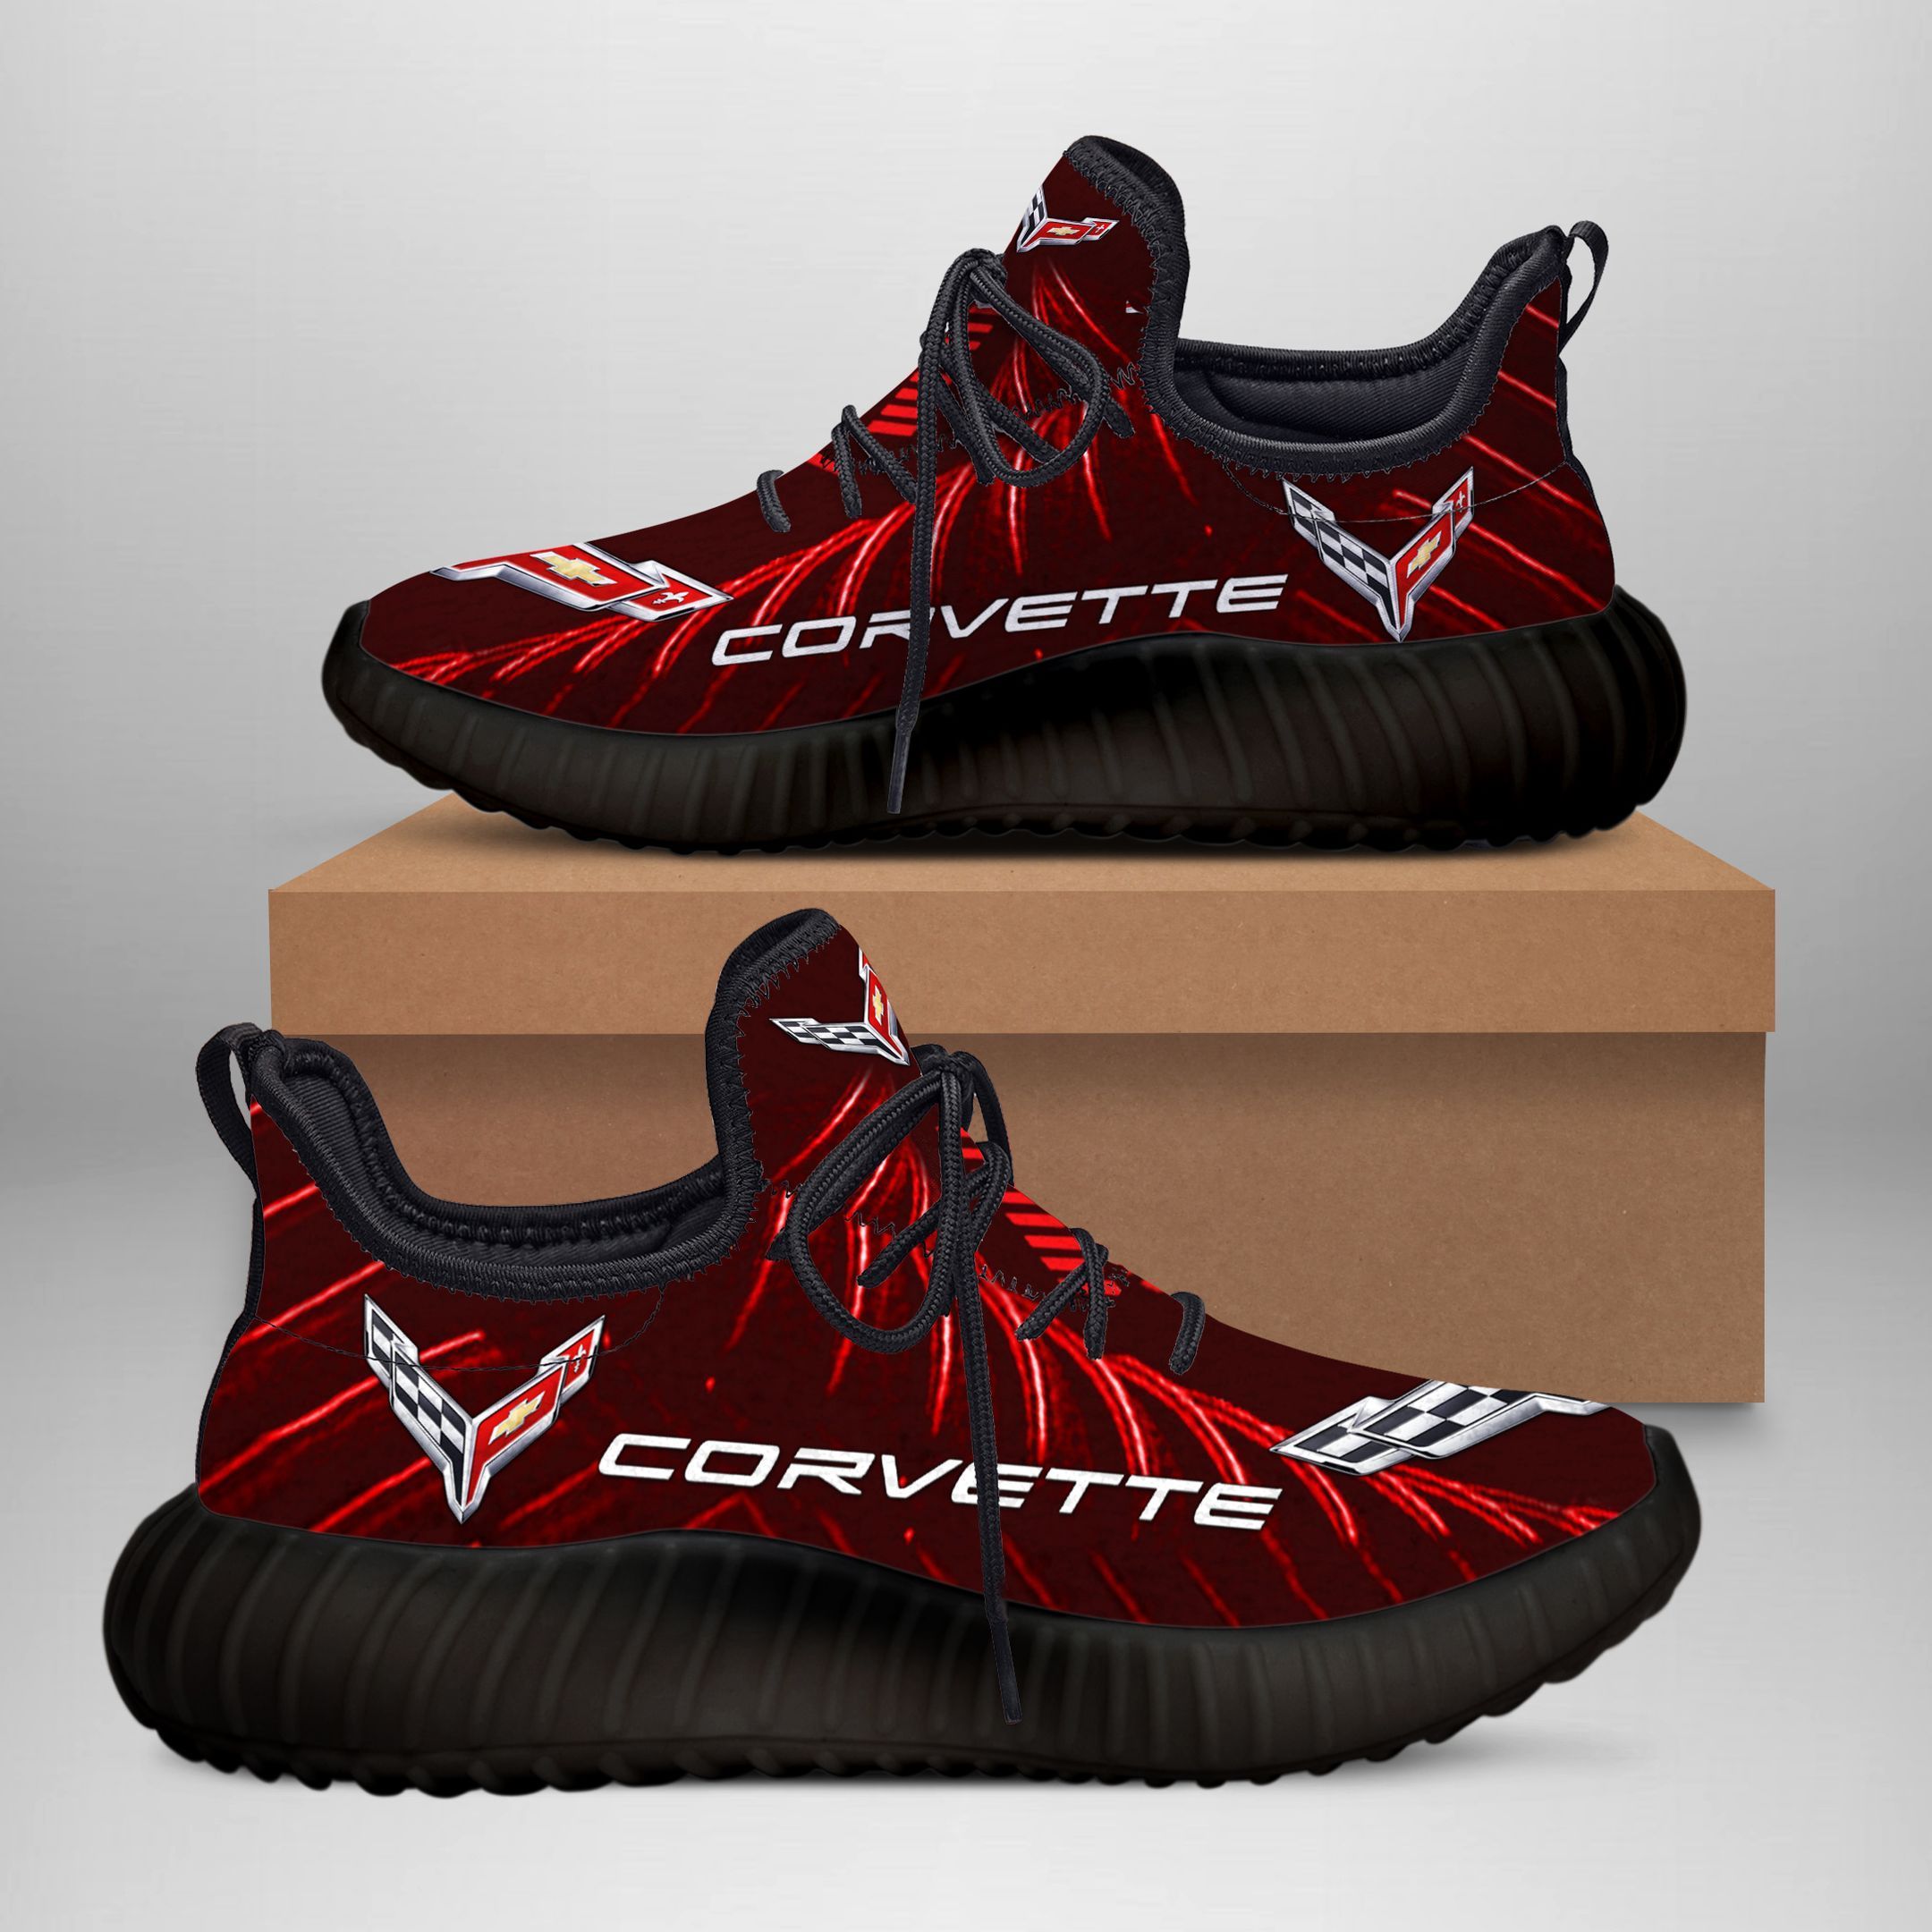 Corvette  Yz Boots Ver 9 (Red)